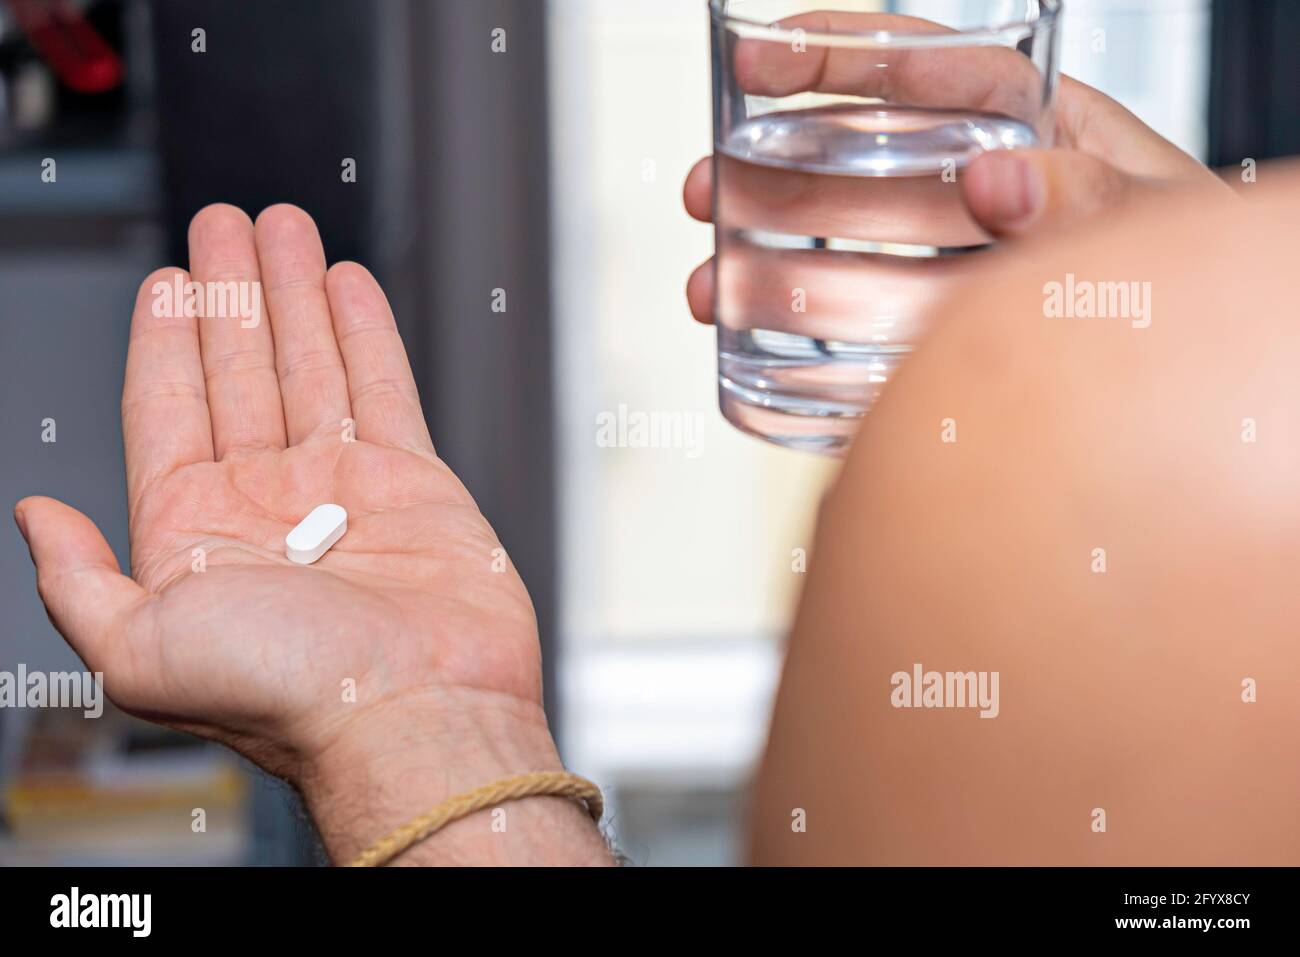 close up of male hands holding pill capsule vitamin supplement with glass of water close up Stock Photo